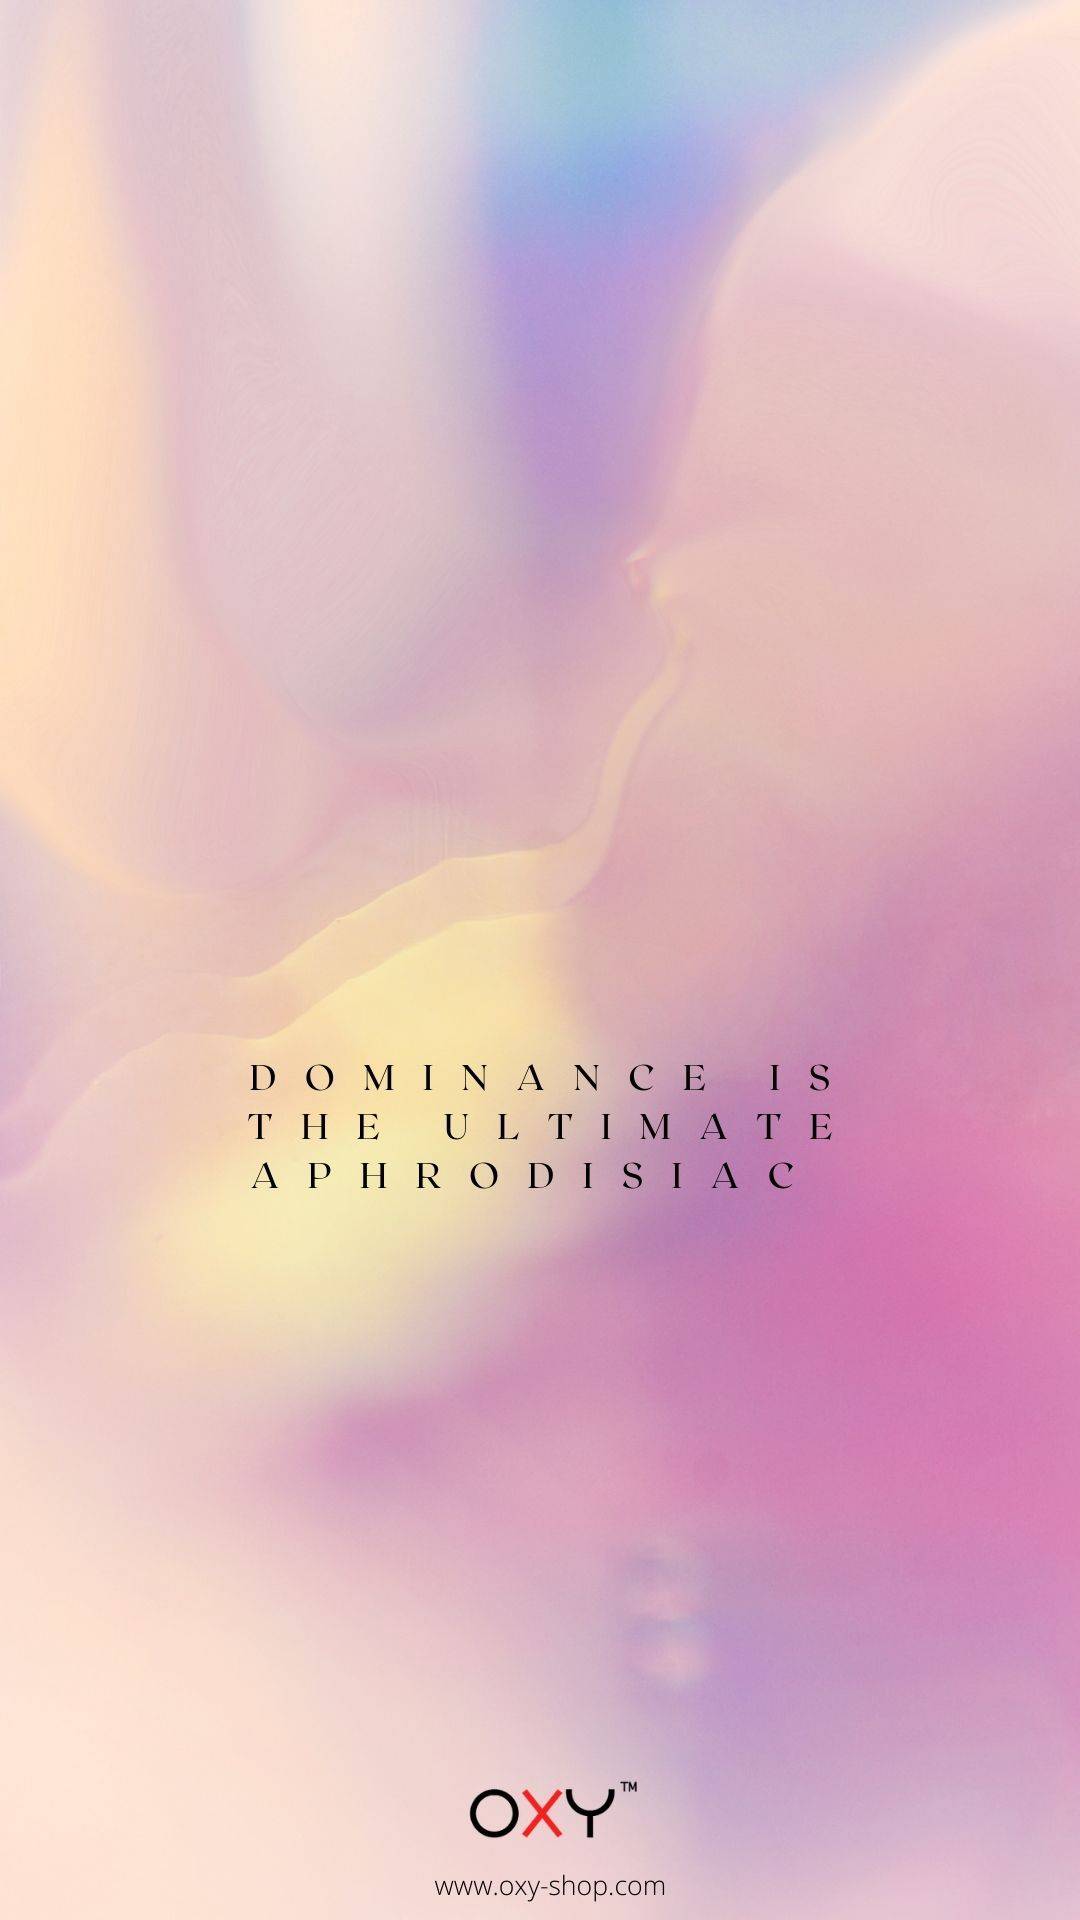 Dominance is the Ultimate Aphrodisiac. - BDSM wallpaper